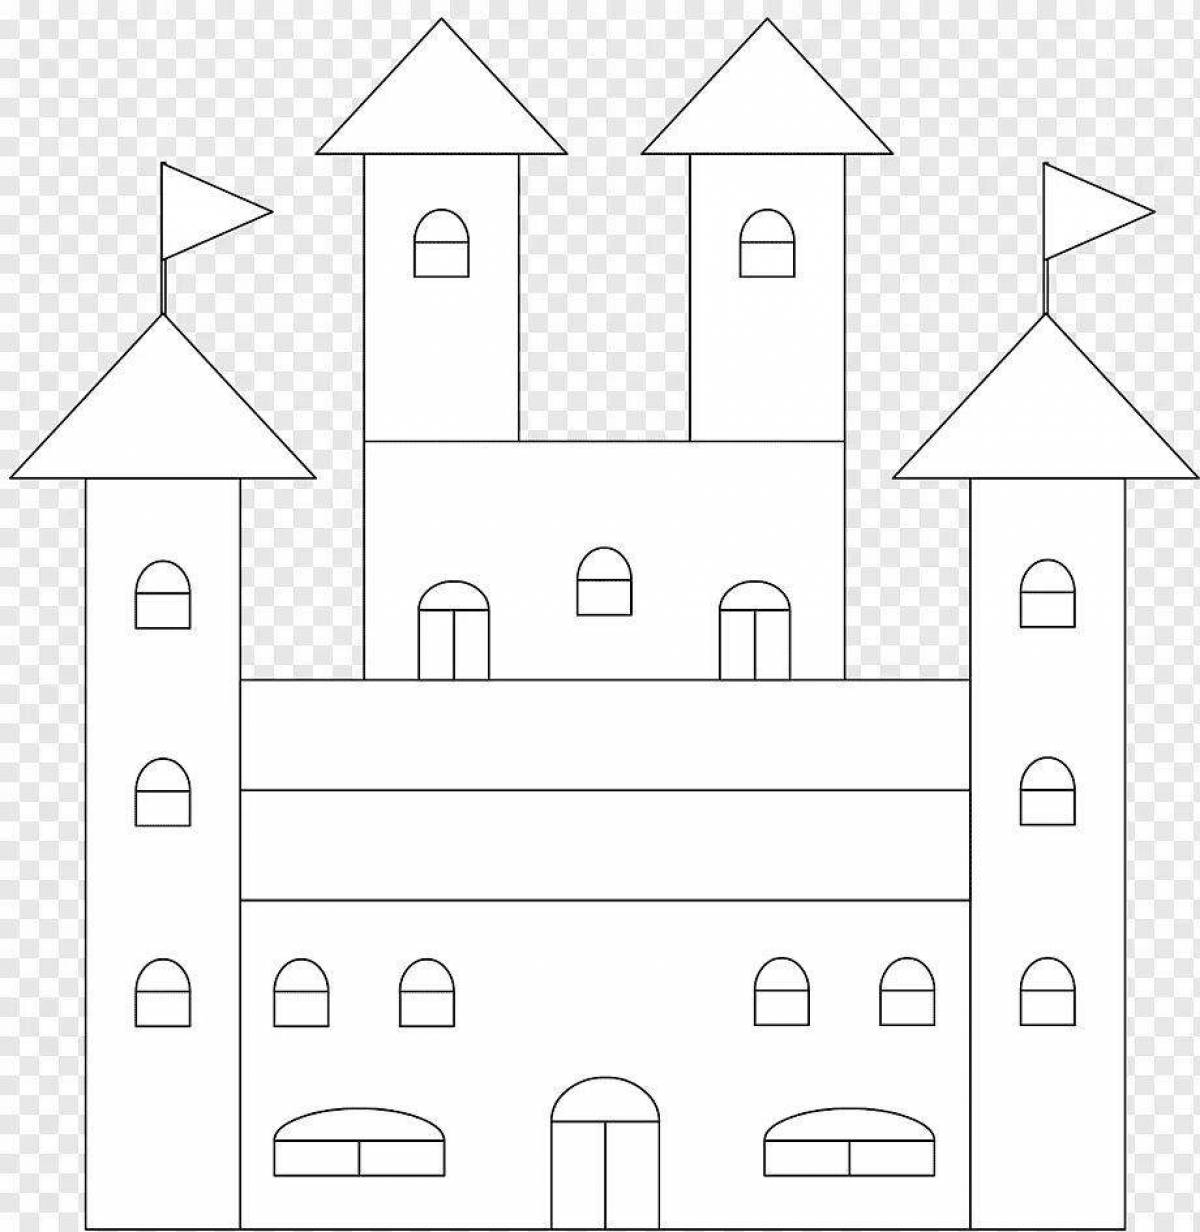 Elegant coloring book for girls with houses and castles